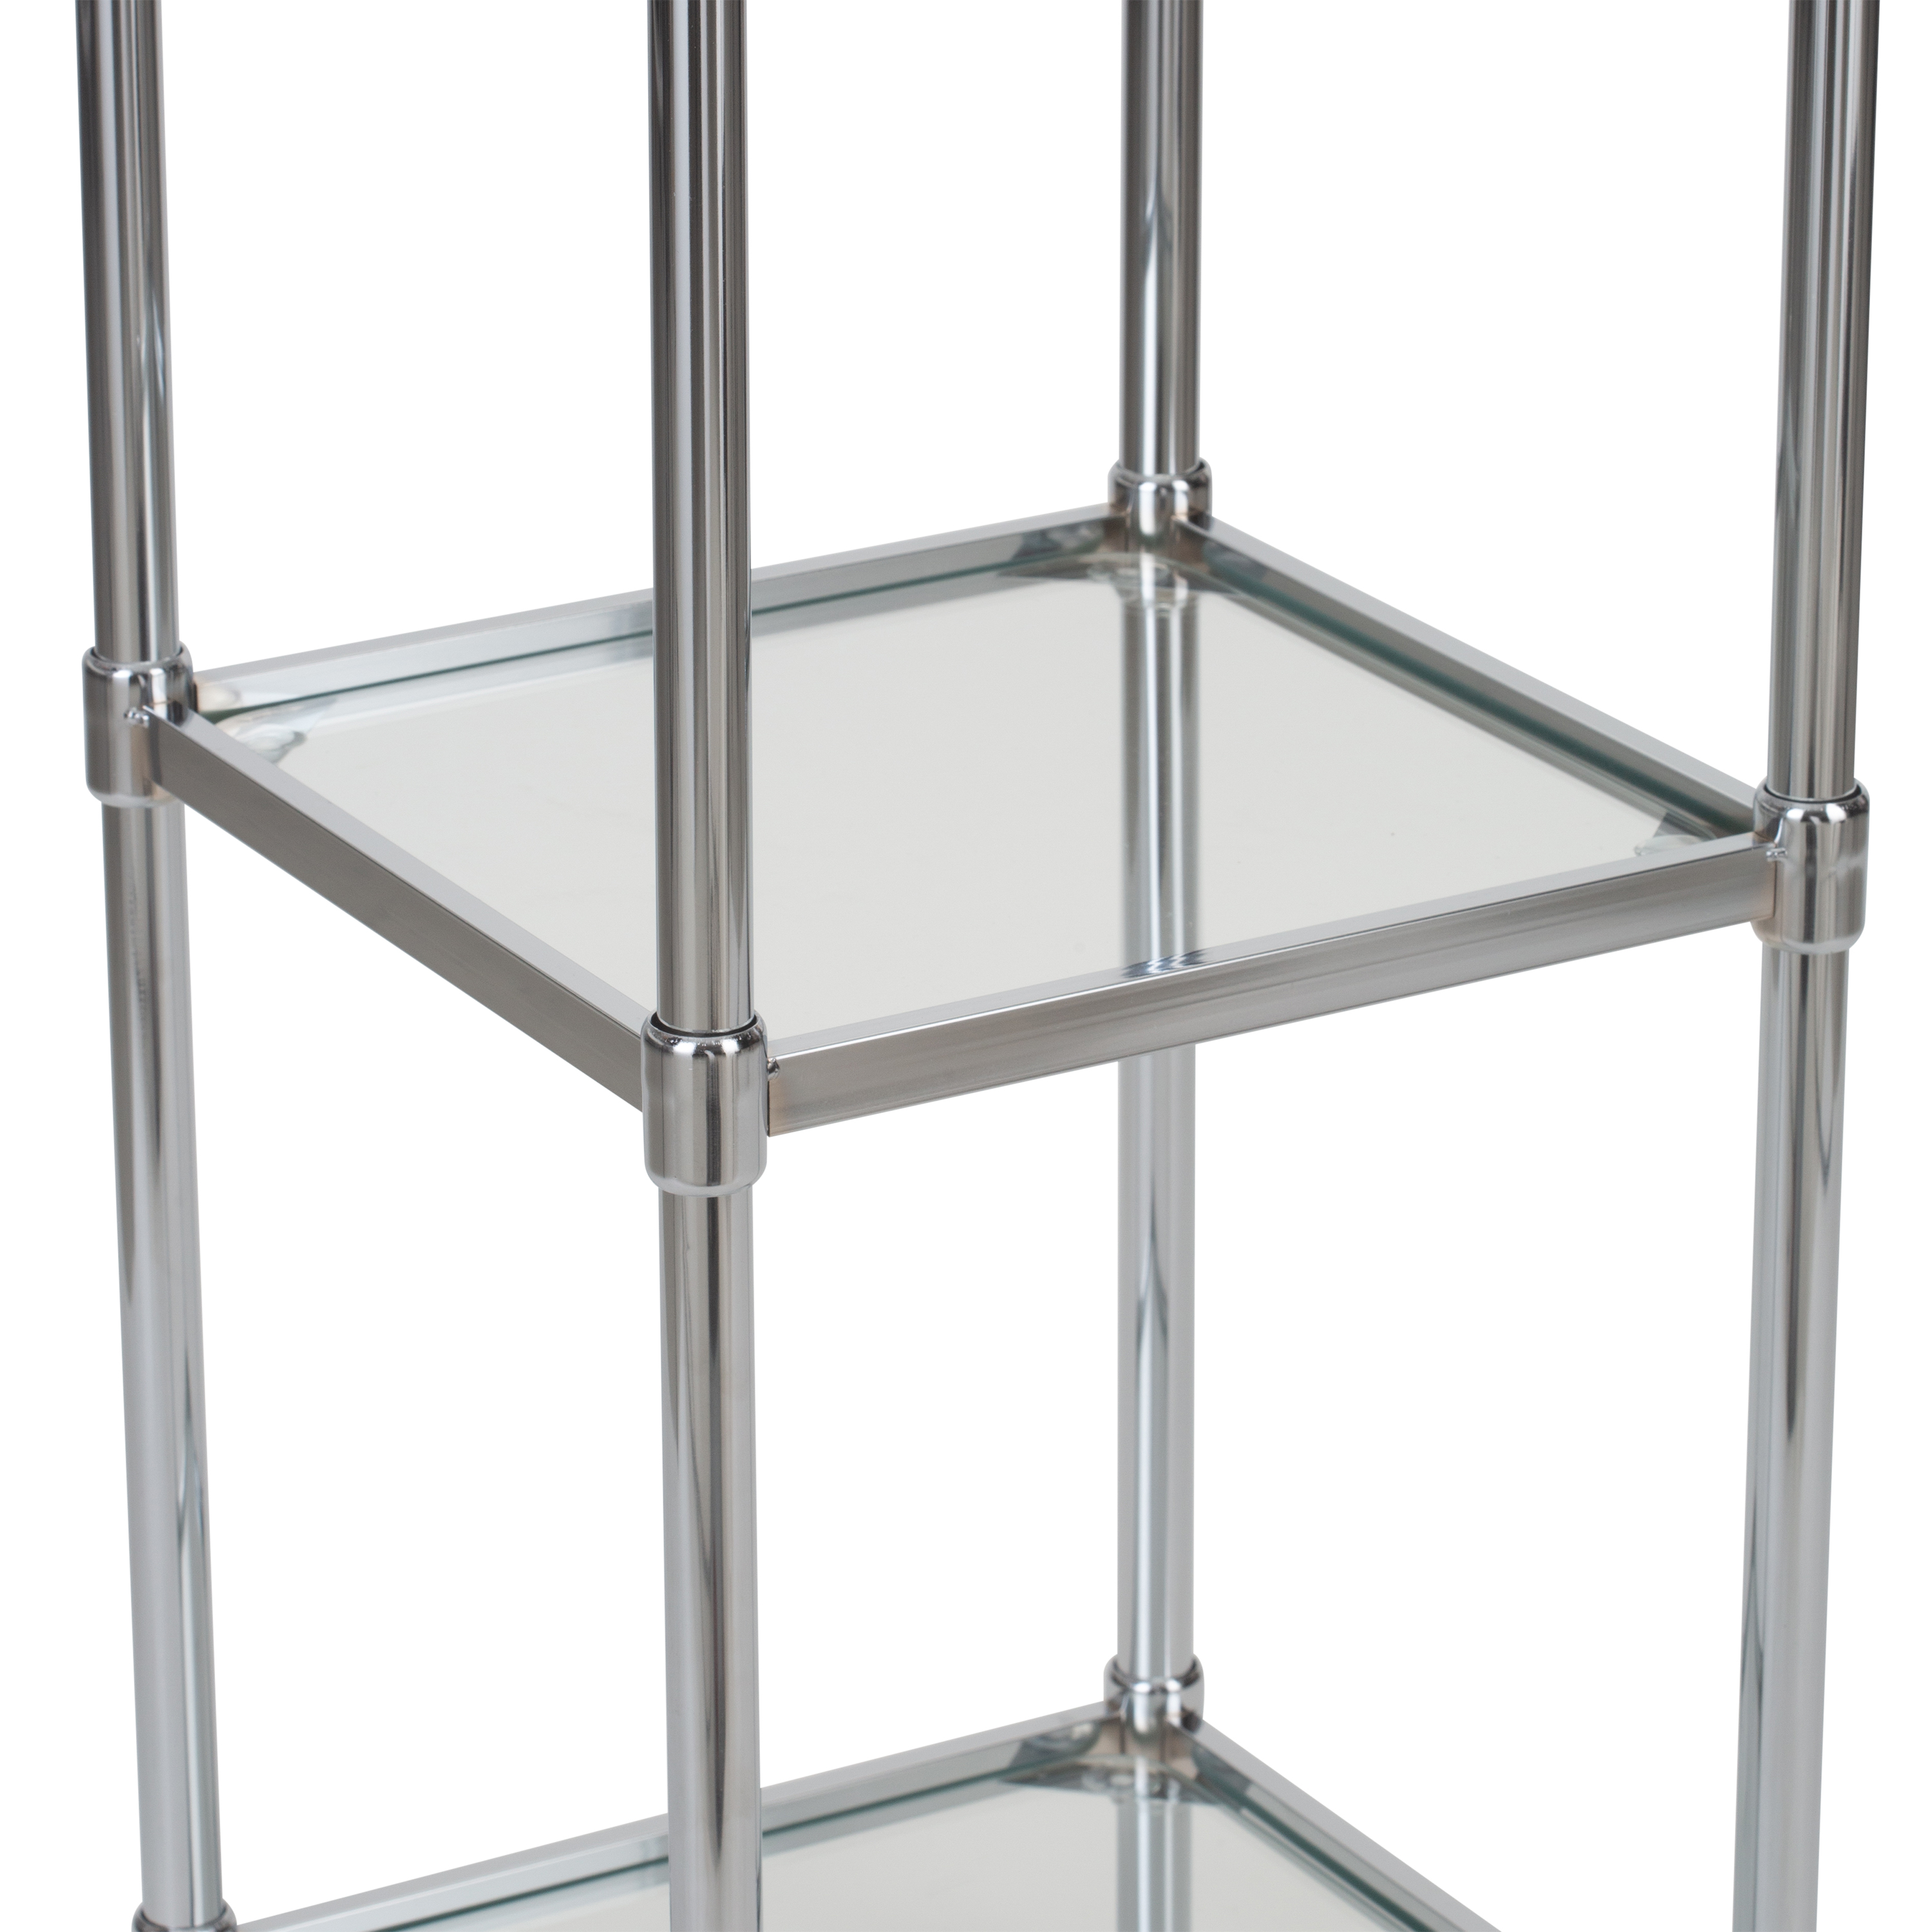 Organize It All 3 Tier Freestanding Steel Tempered Glass Shelving Tower - image 5 of 7